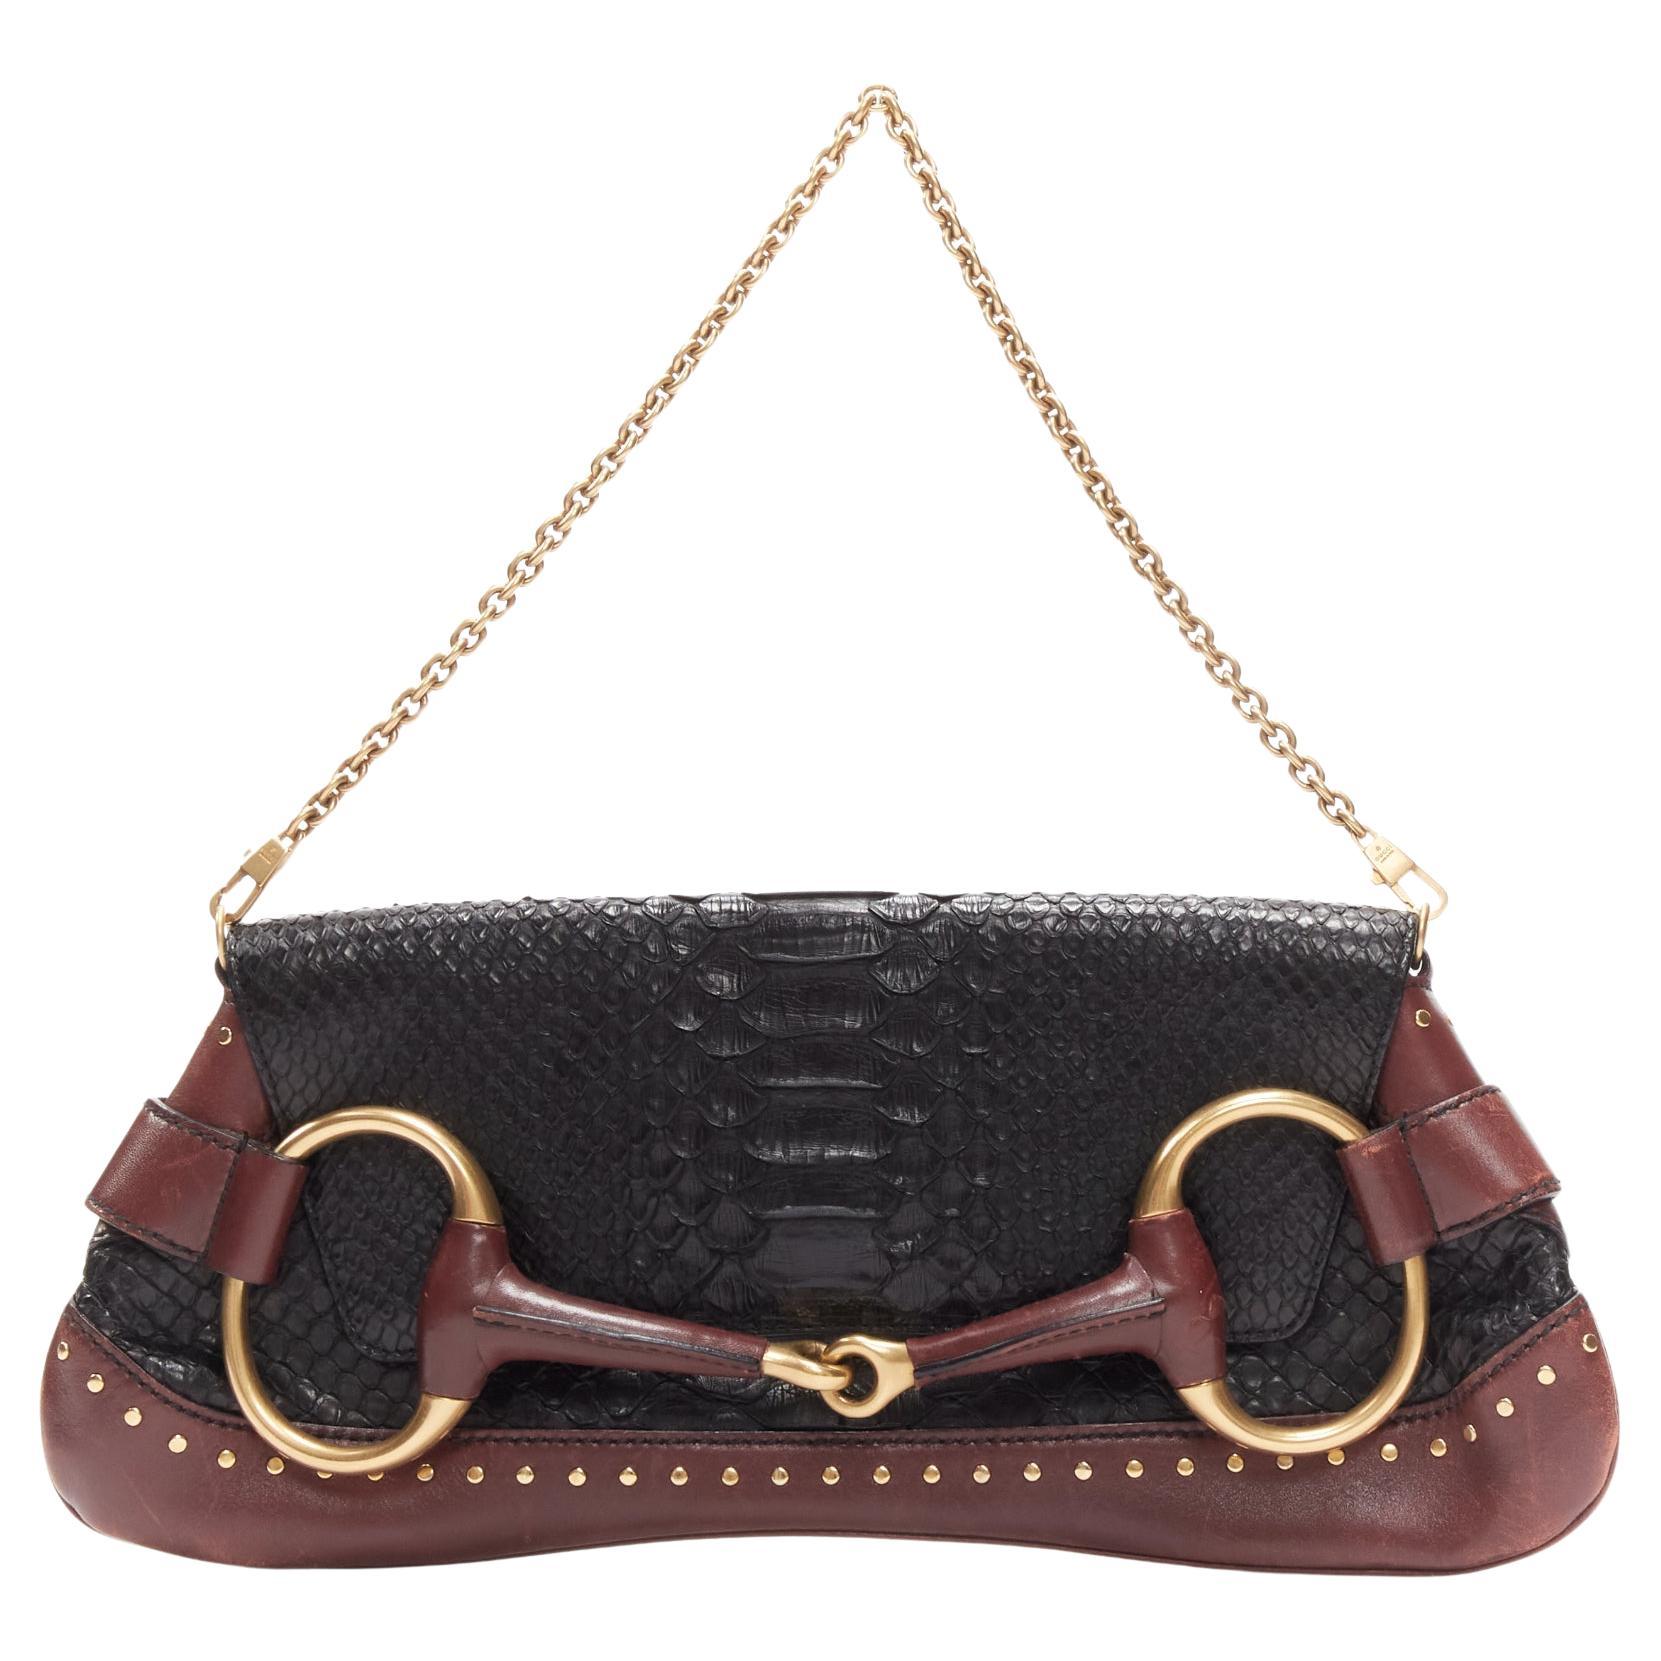 FWRD Renew Chanel Quilted Chain Shoulder Bag in Brown